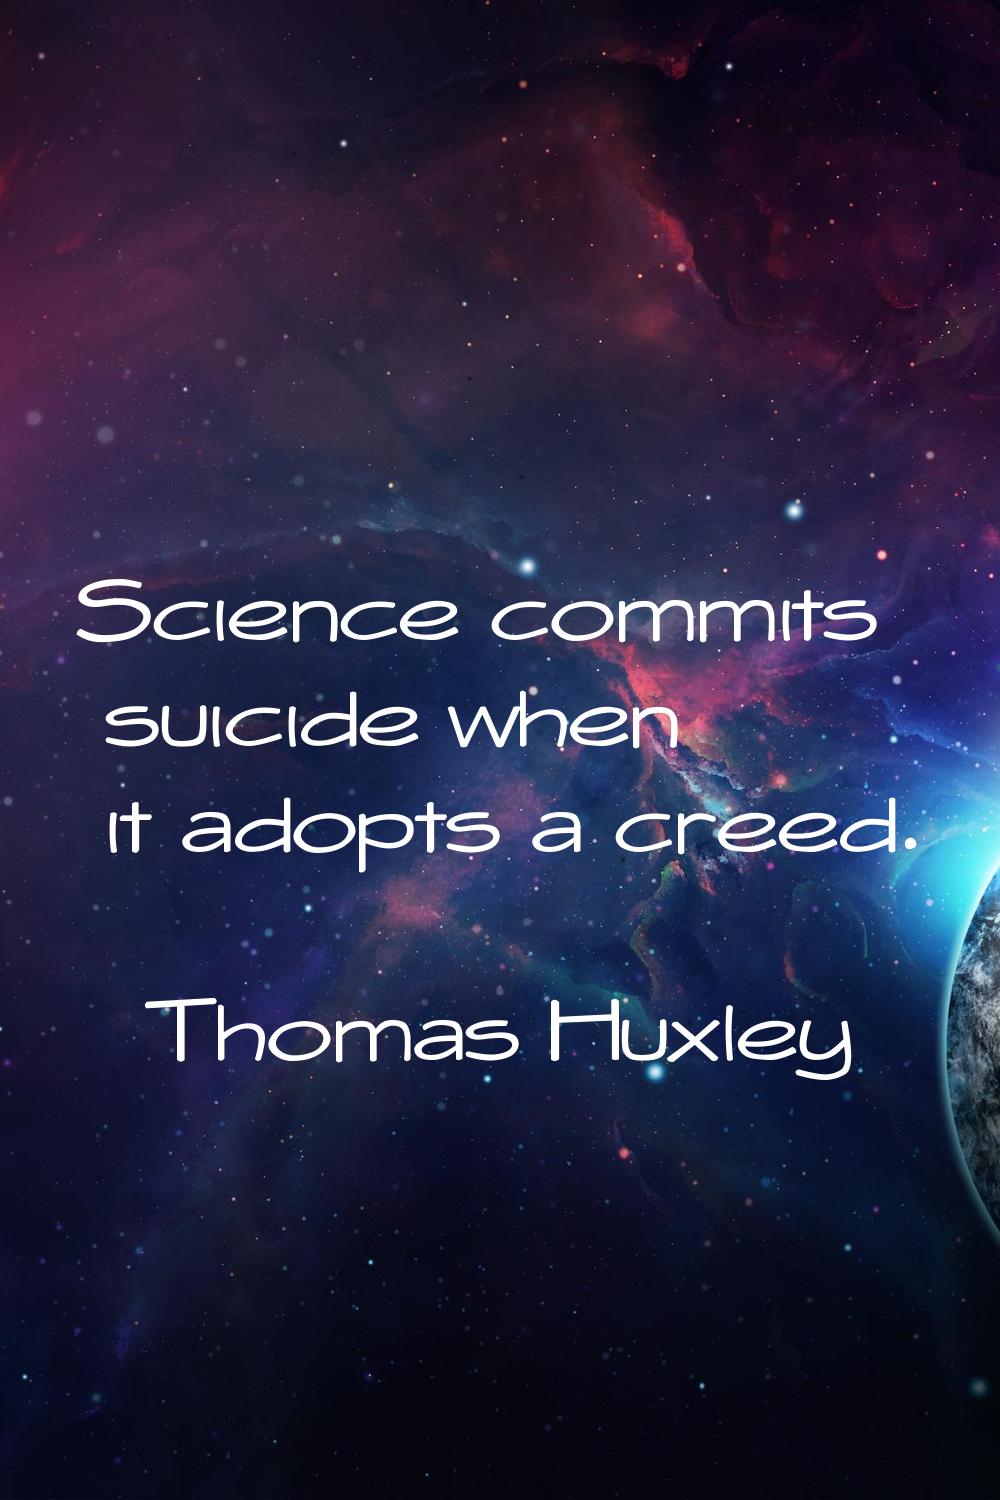 Science commits suicide when it adopts a creed.